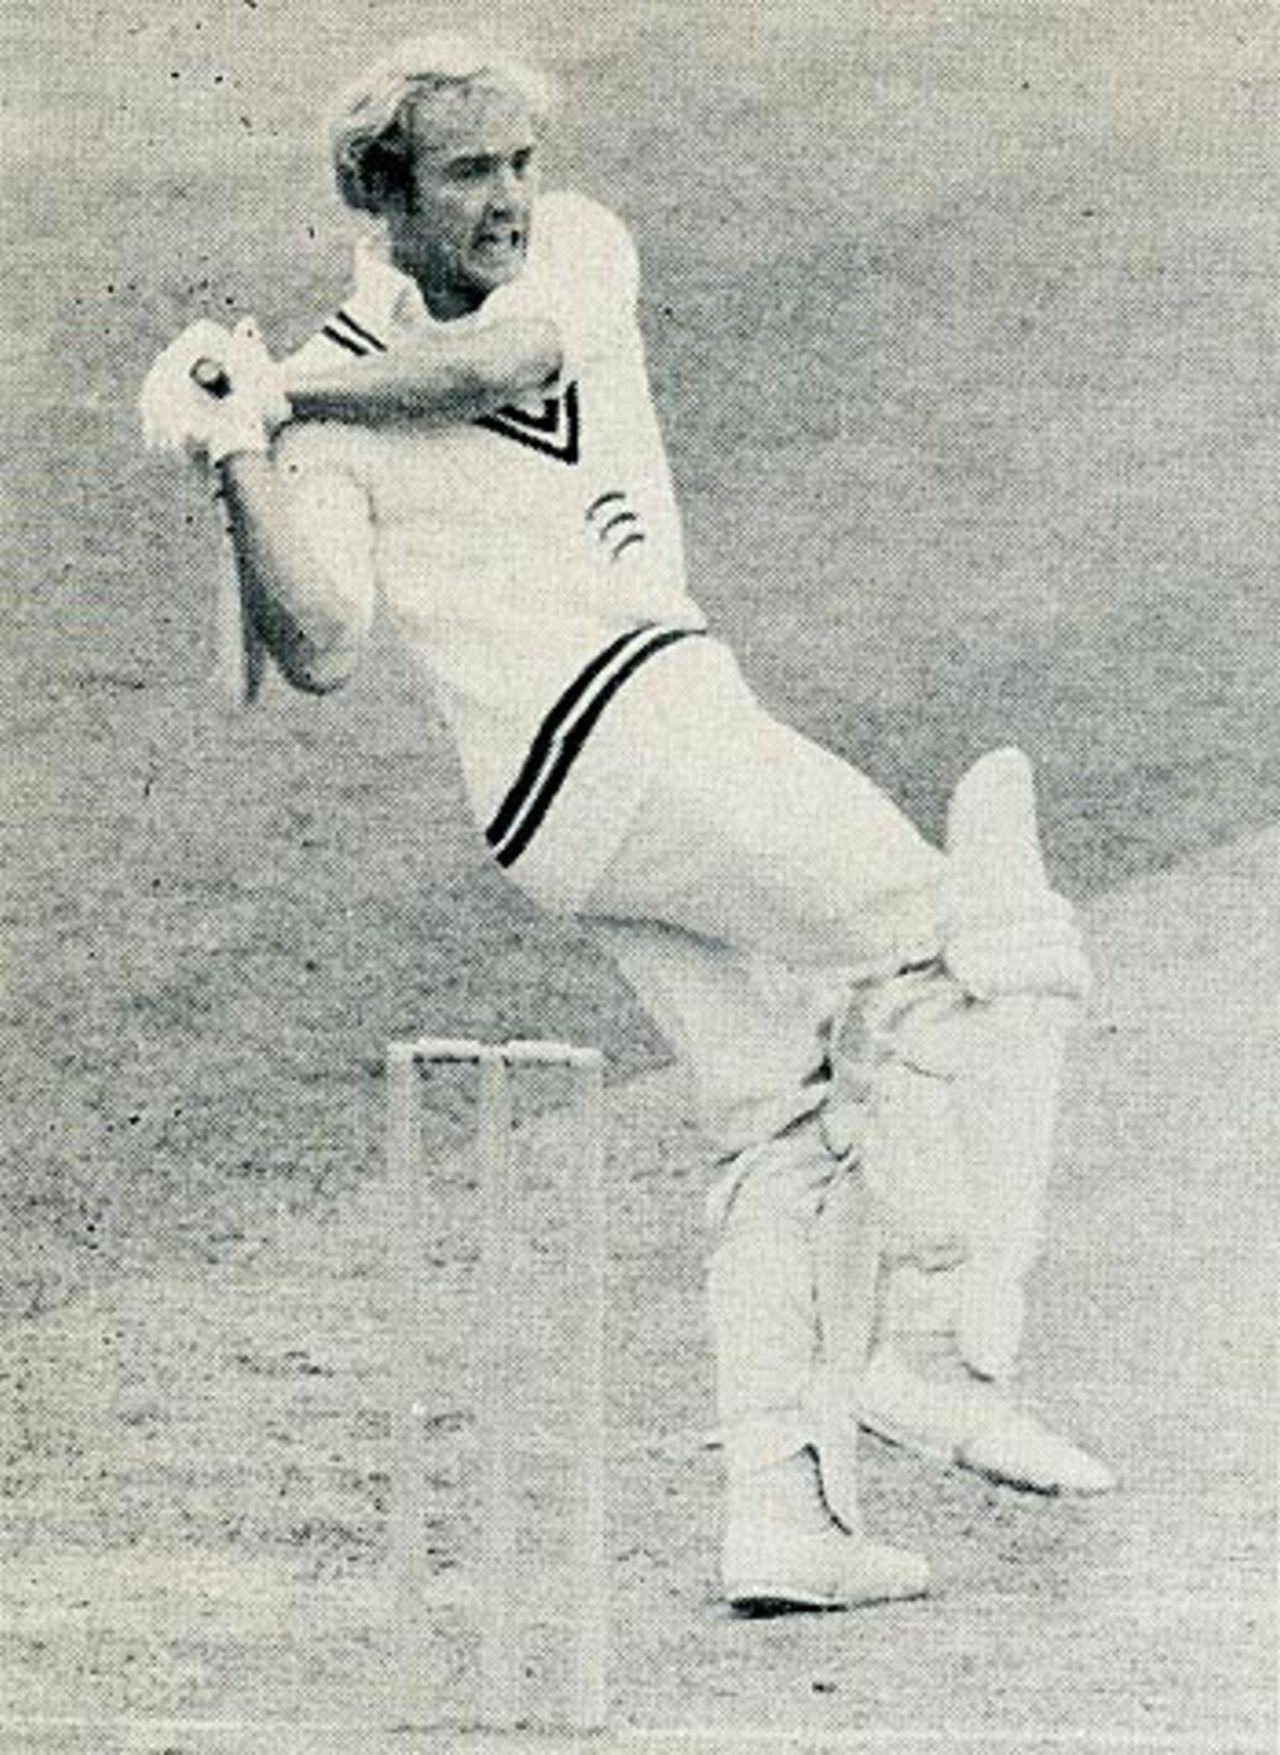 Graham Barlow on the attack in 1976